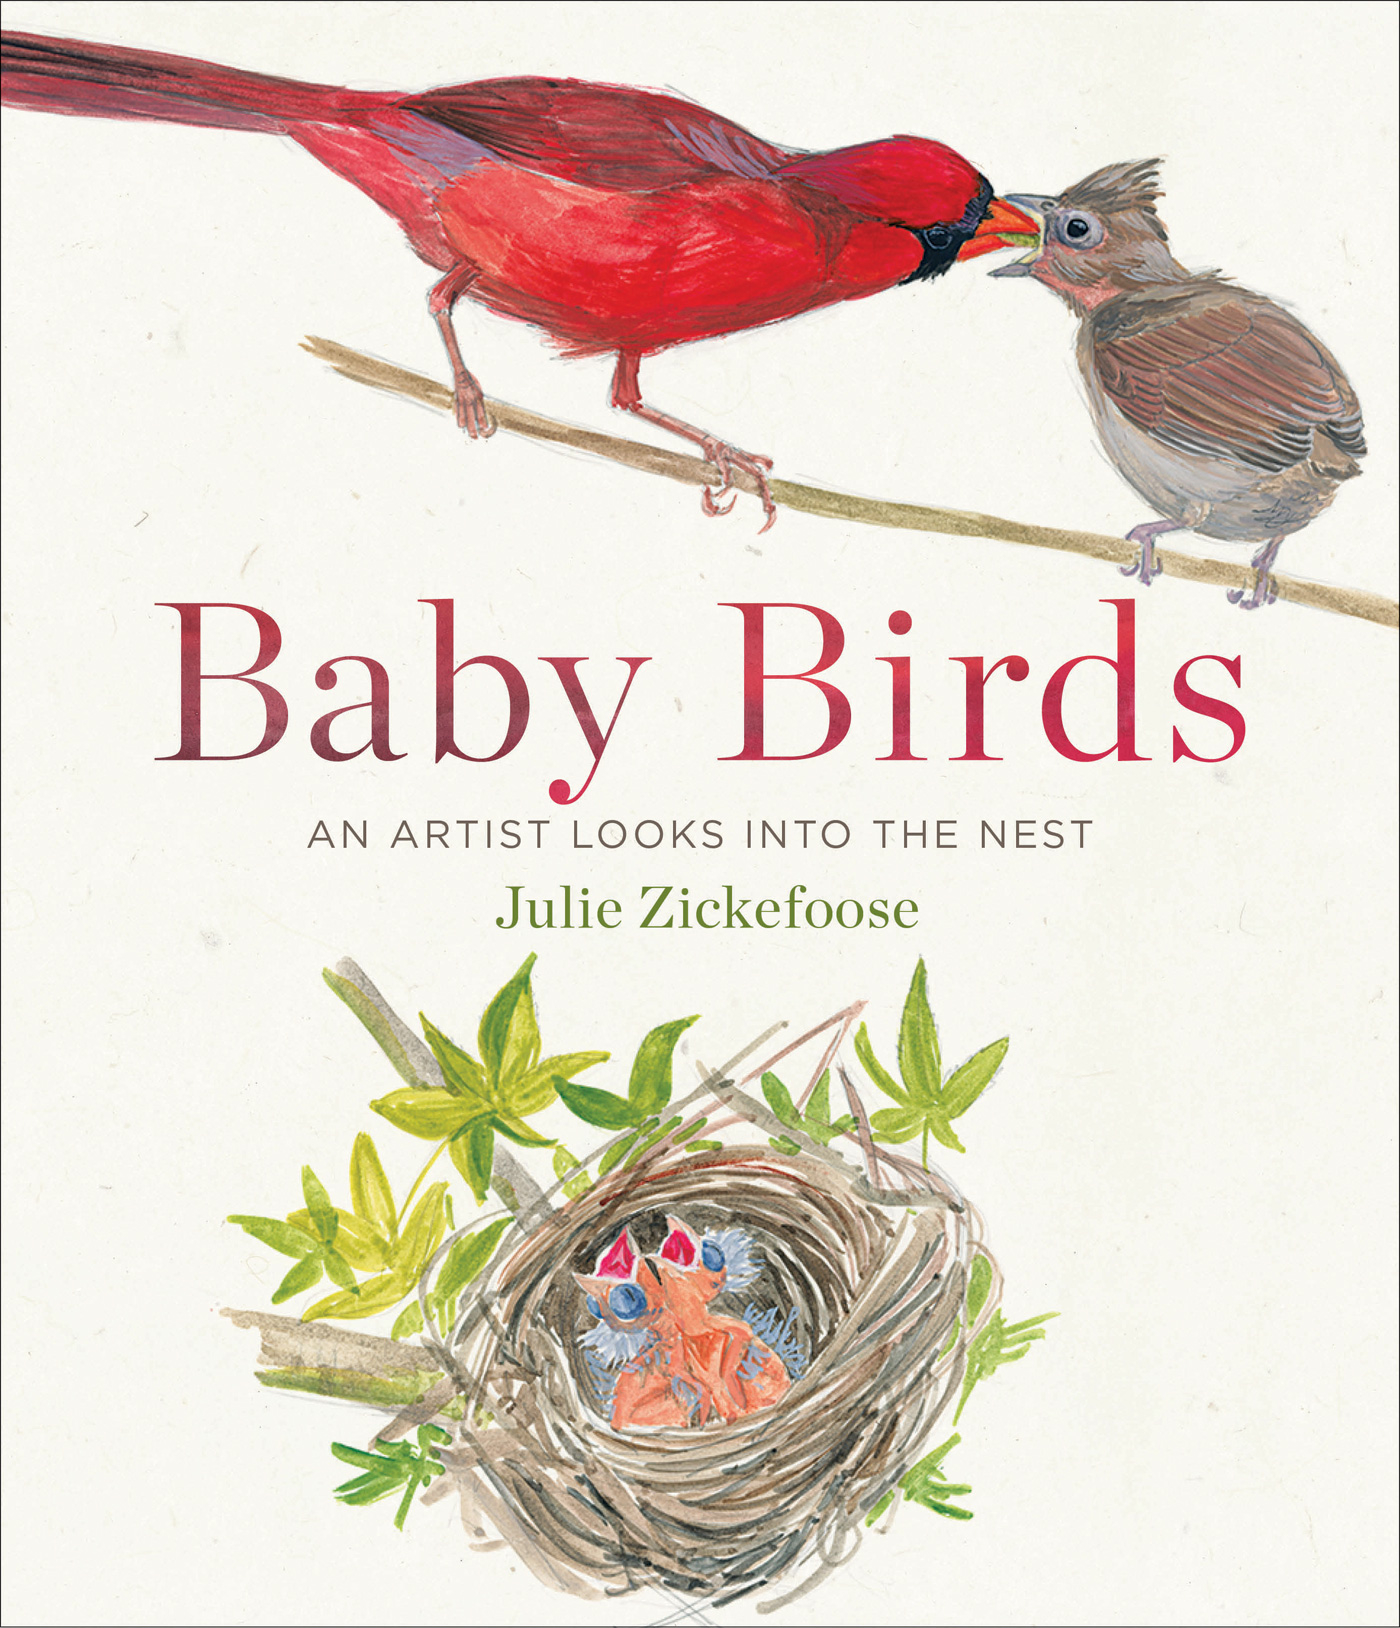 Book Review: Baby Birds: An Artist Looks Into the Nest by Julie Zickefoose